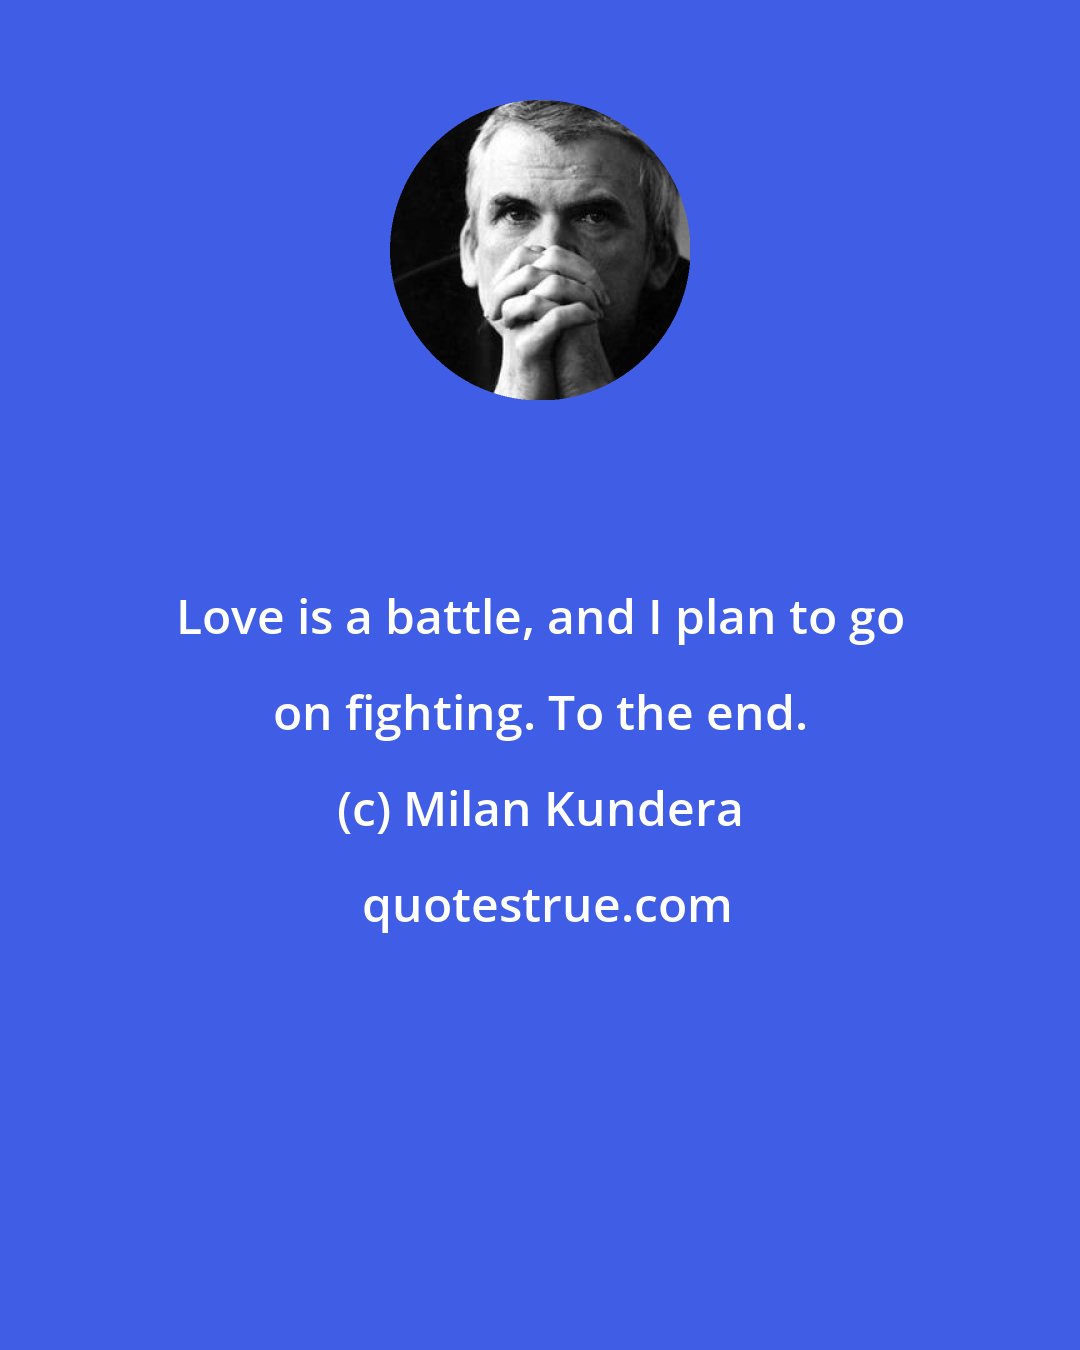 Milan Kundera: Love is a battle, and I plan to go on fighting. To the end.